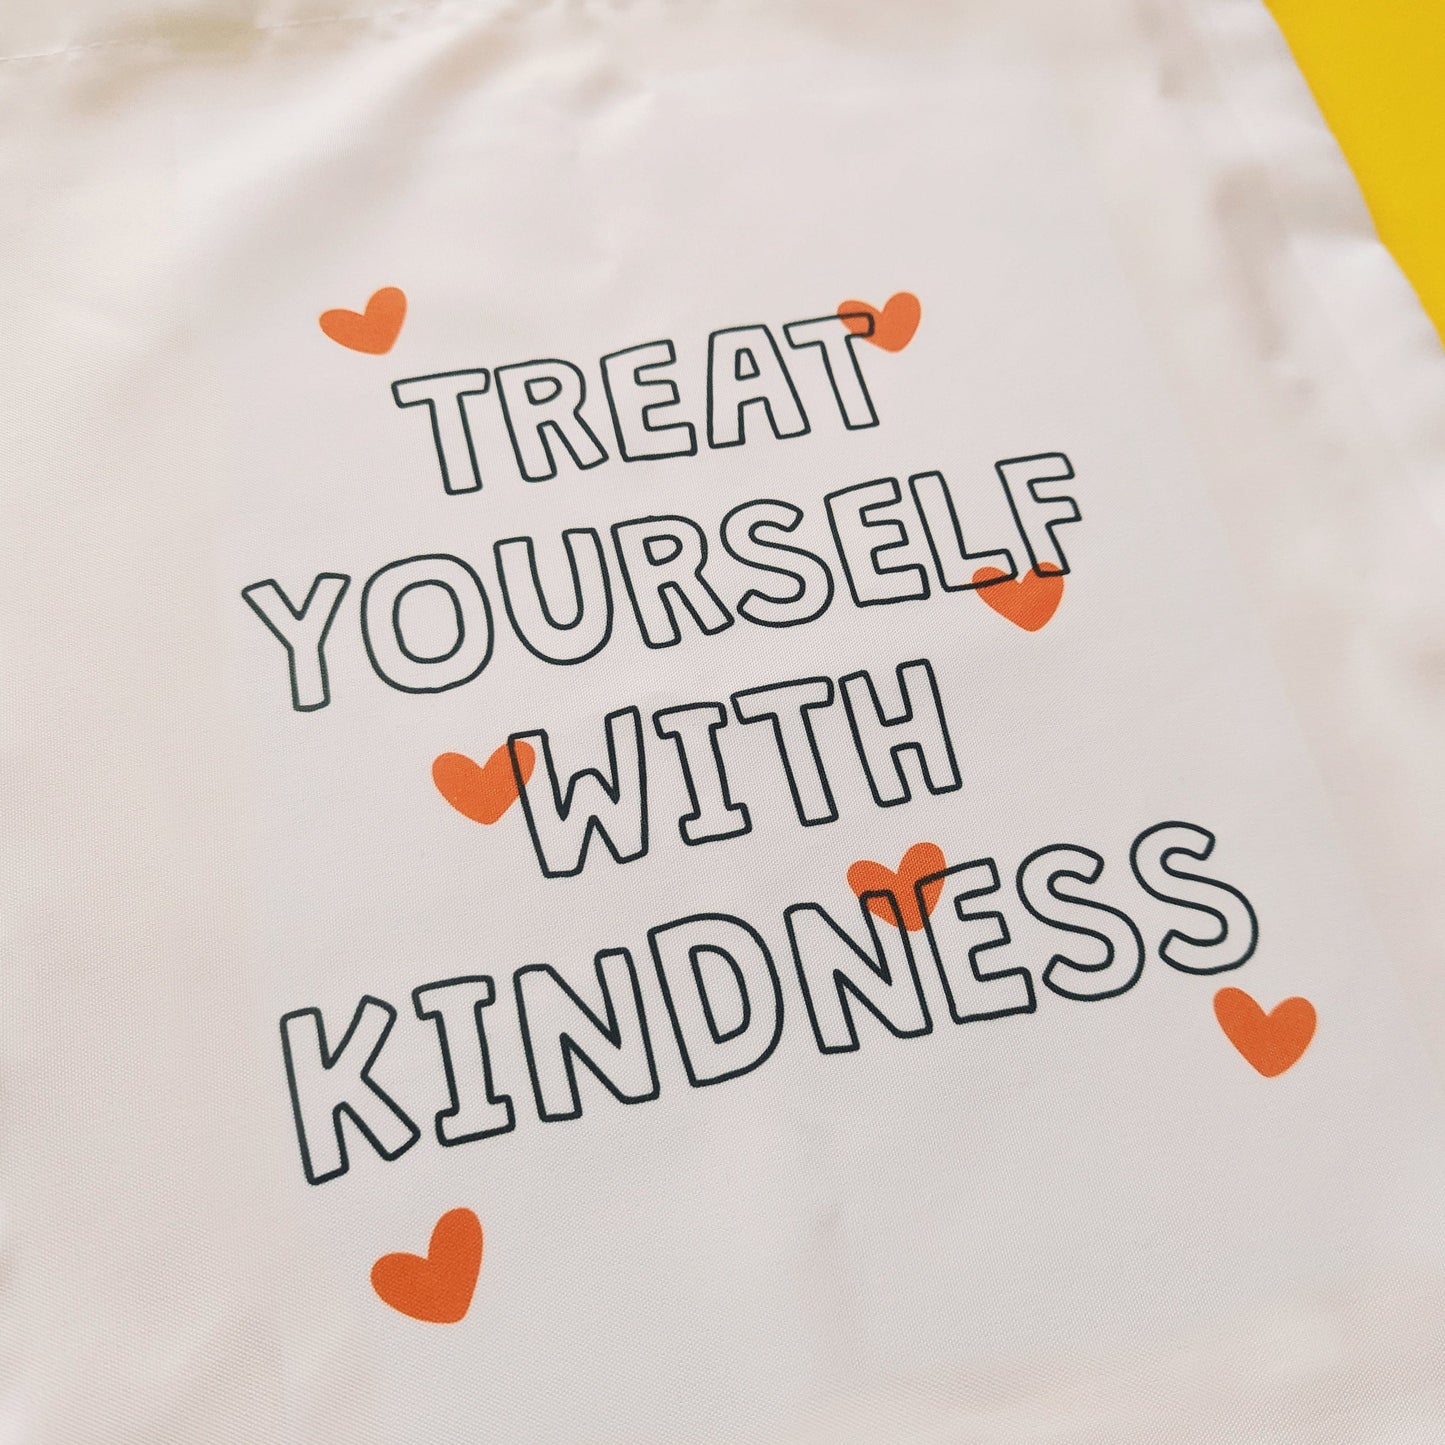 Treat Yourself With Kindness Tote bag